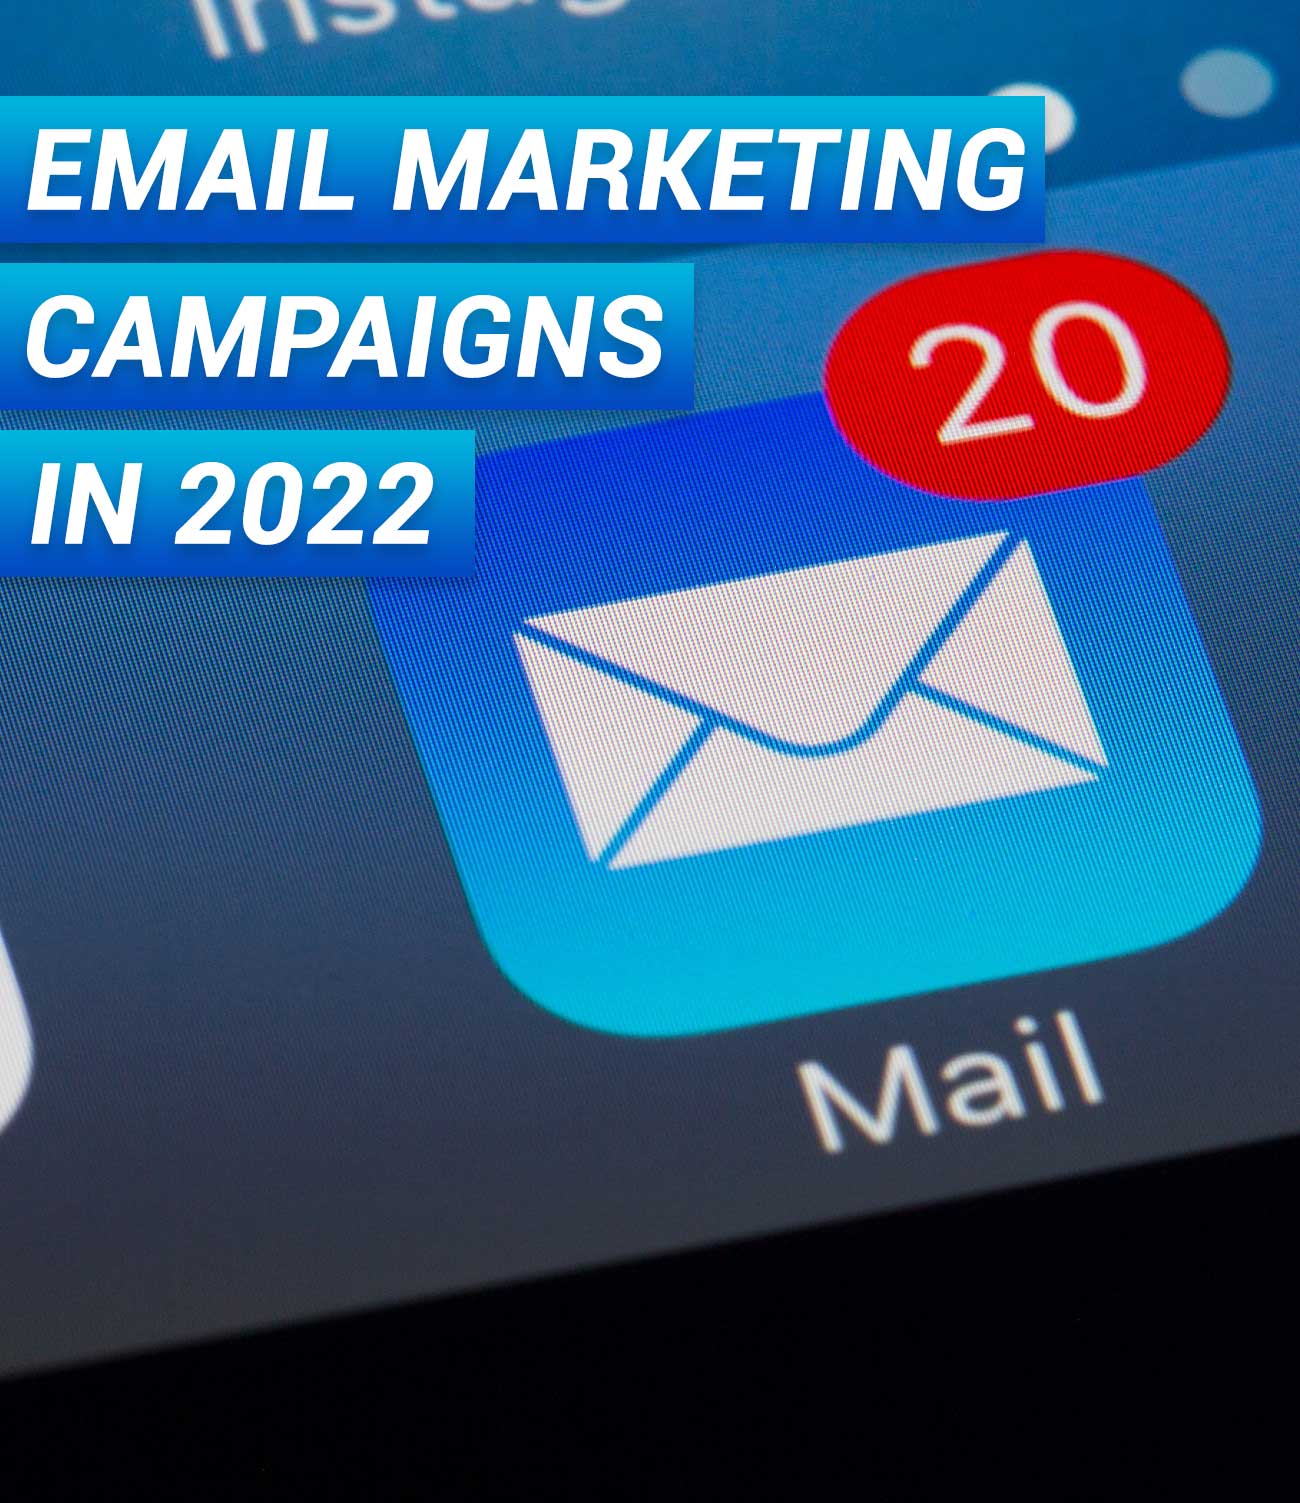 Email Marketing Campaign Blog Image